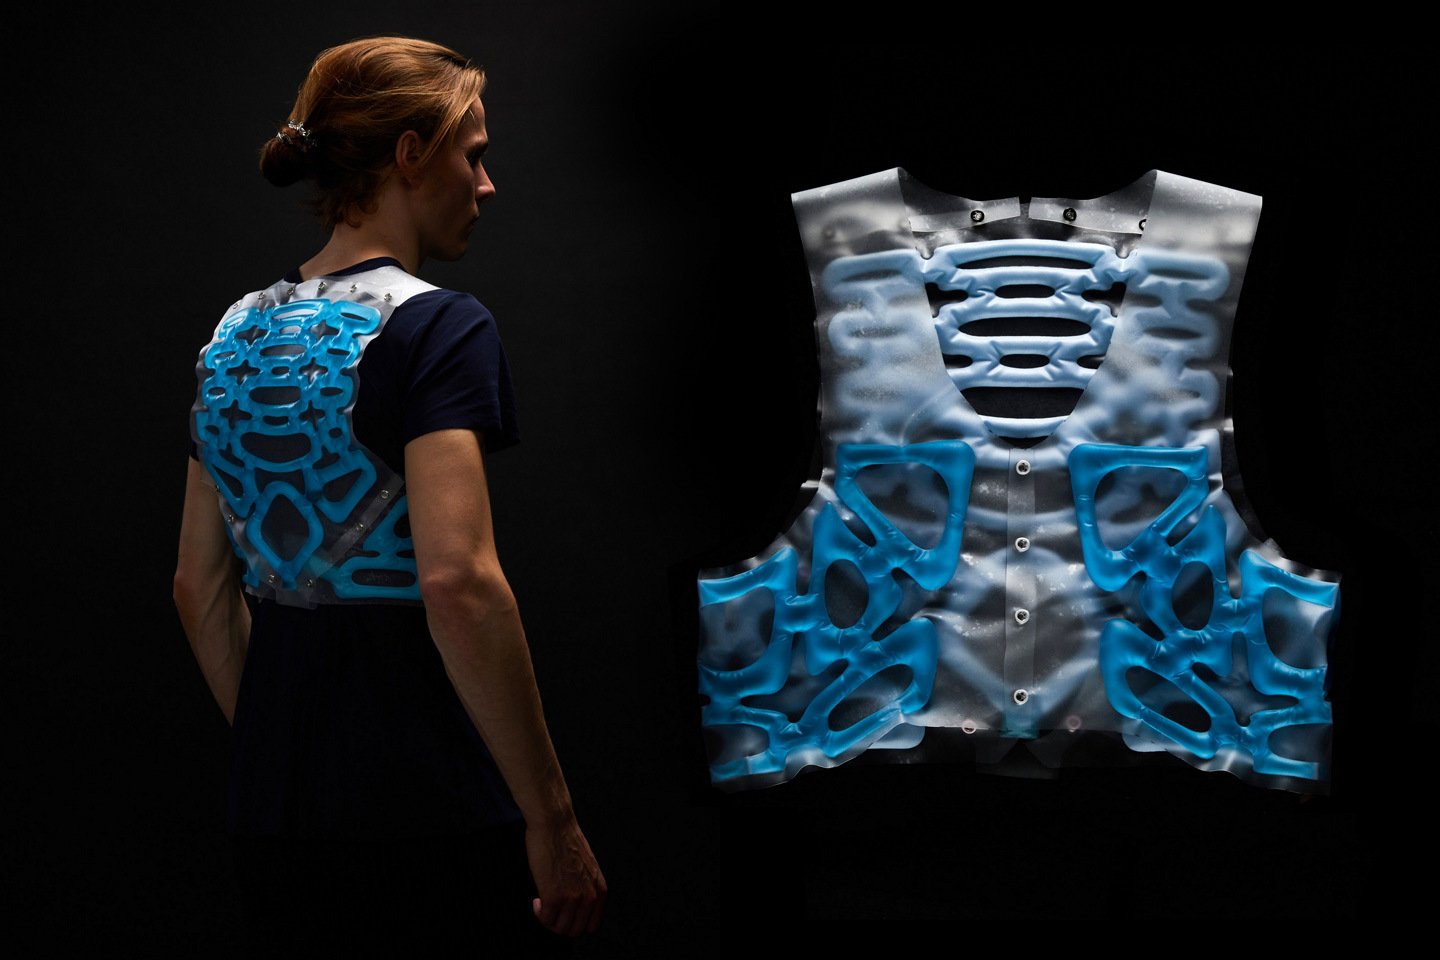 This gel-filled vest can instantly heat you up on command, helping